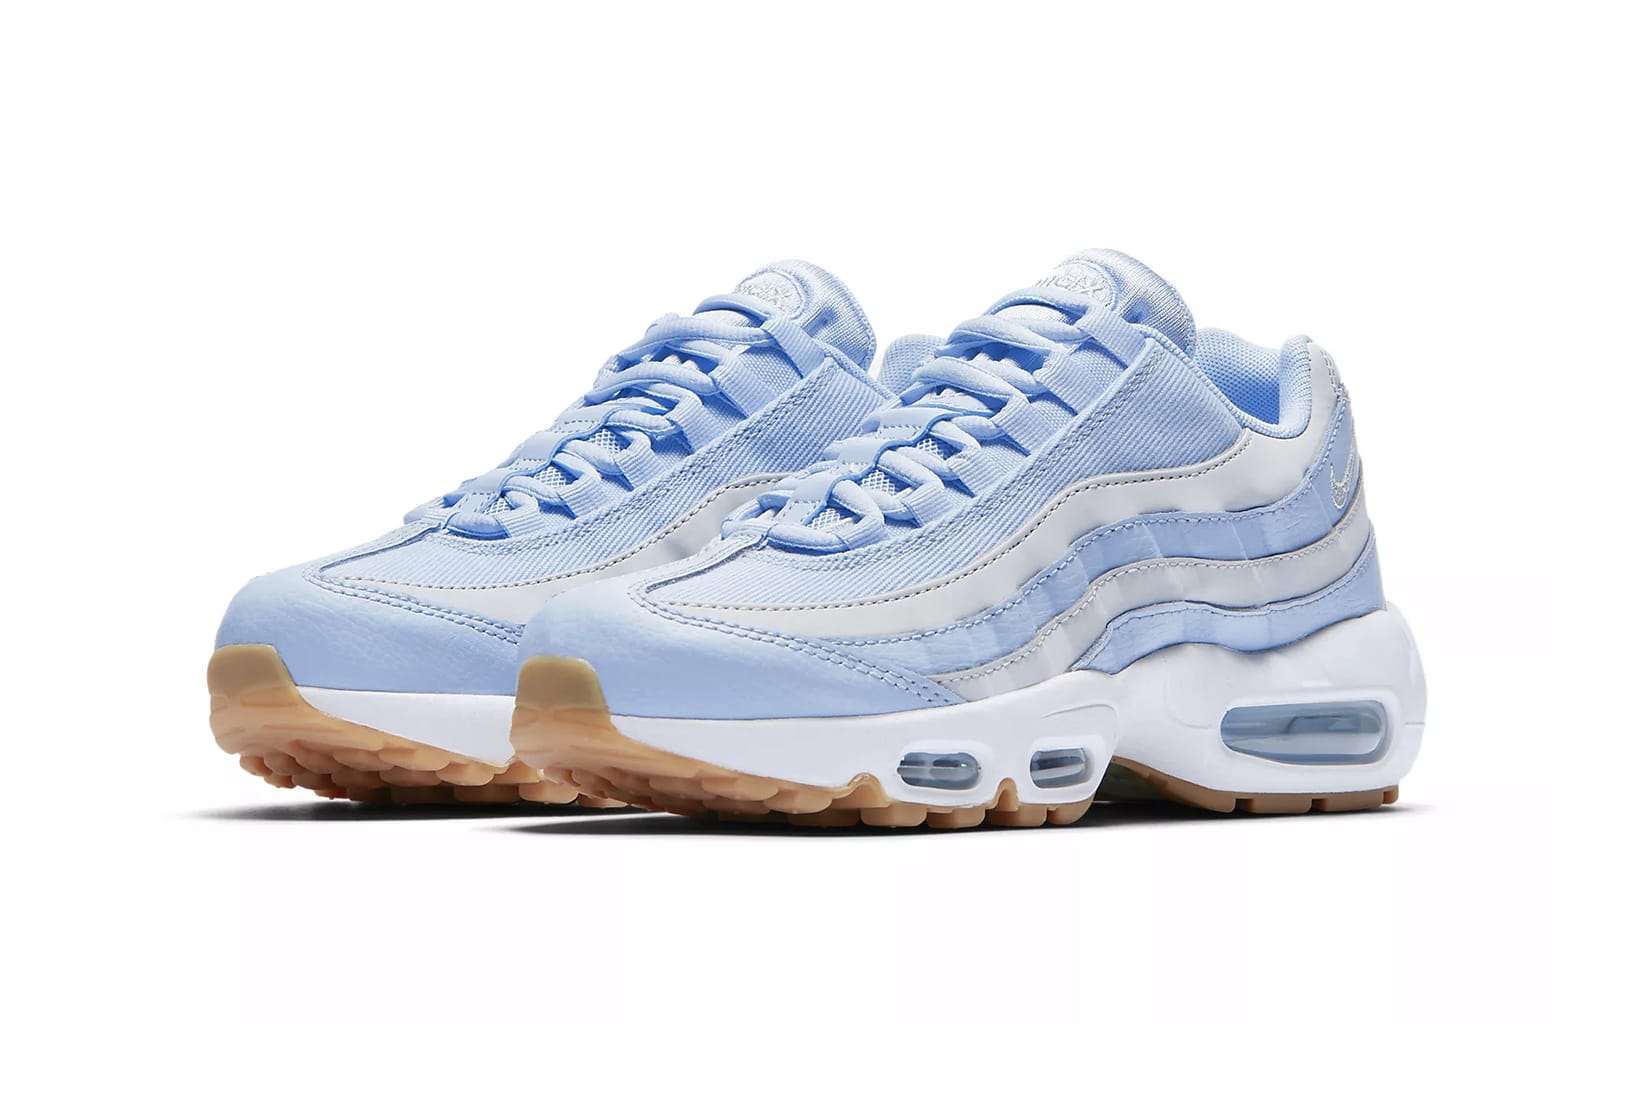 Air Max 95 in Baby Blue \